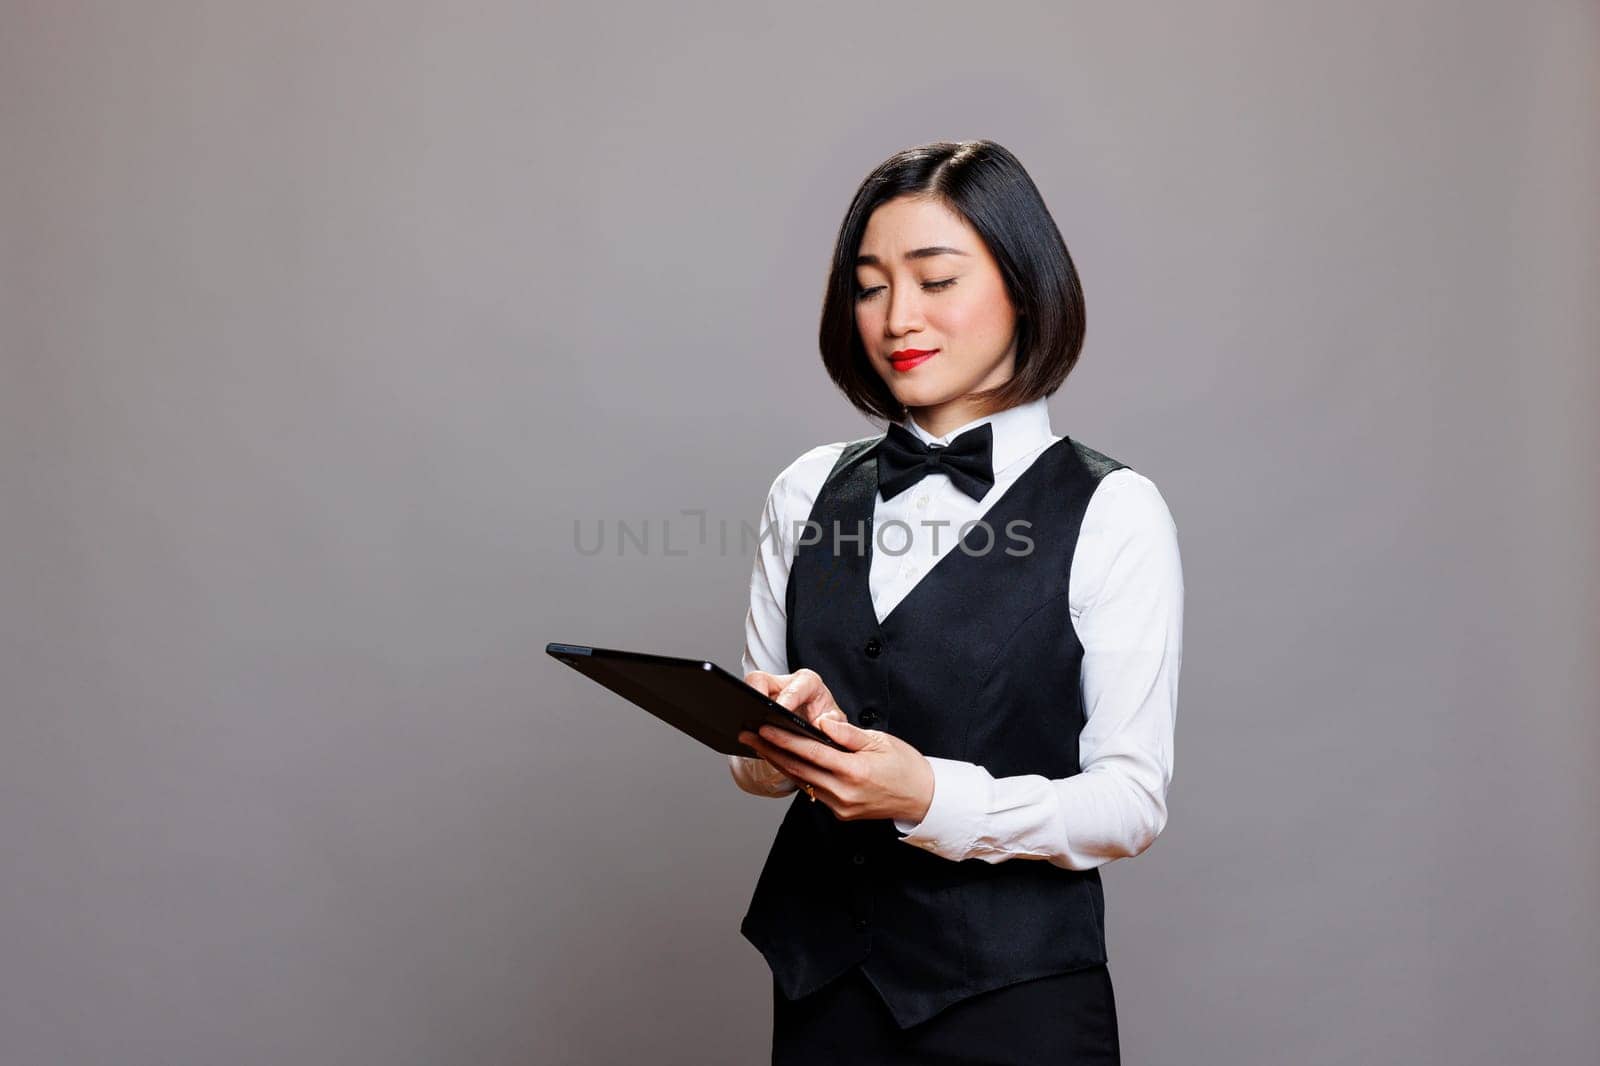 Restaurant administrator young asian woman using digital tablet while posing in studio. Attractive waitress wearing professional uniform and bow tie holding portable device